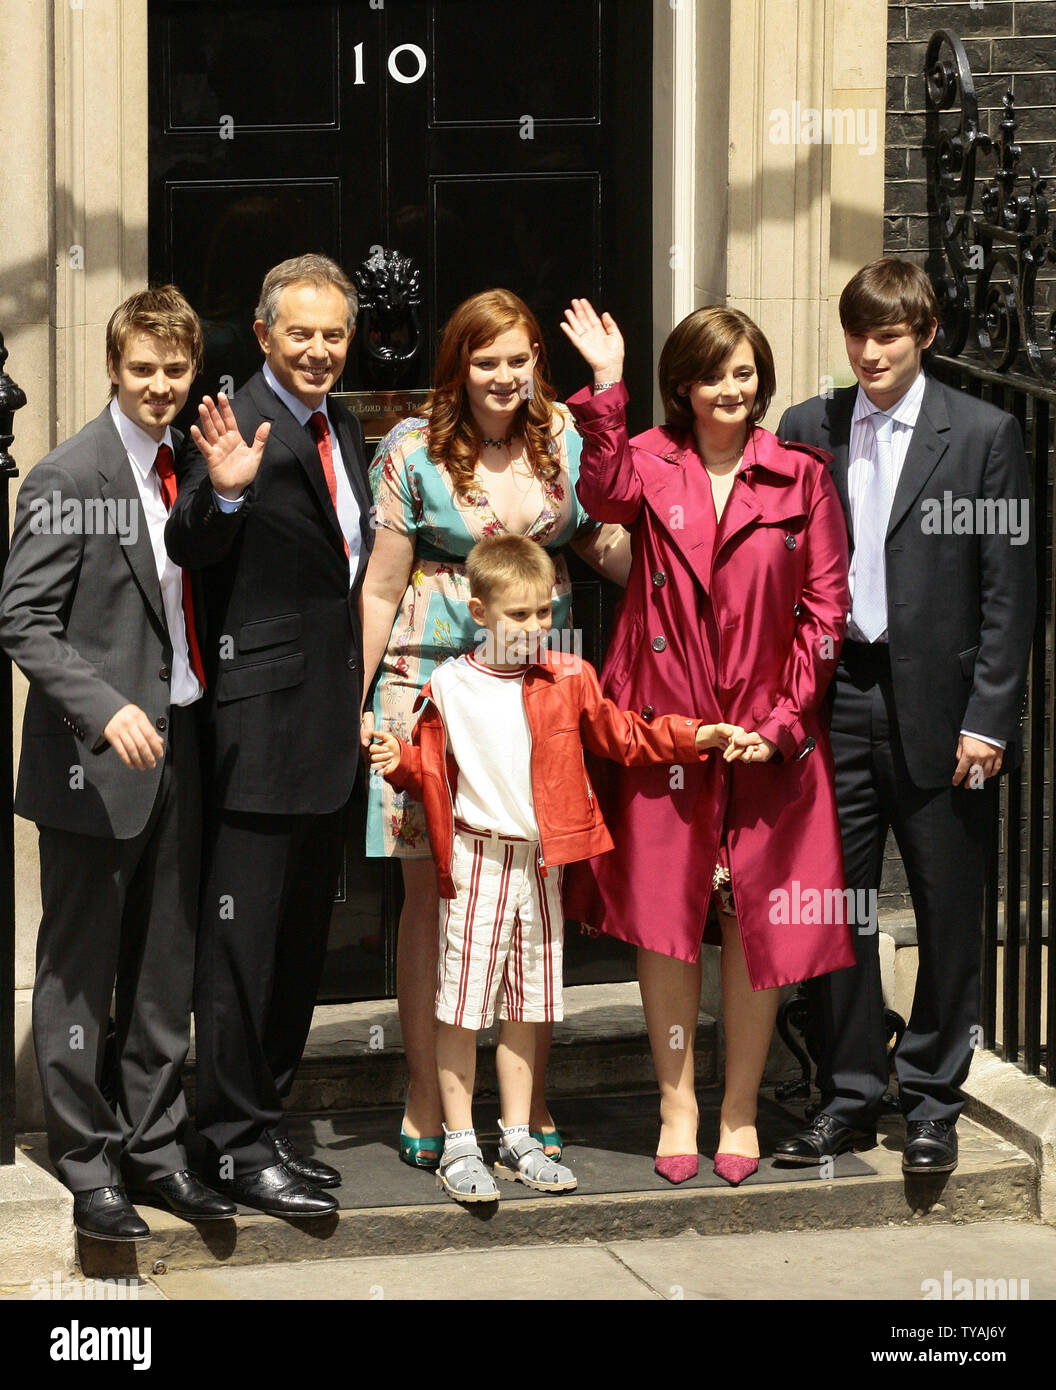 The family of British Prime Minister Tony Blair, Euan, Tony Blair, Kathryn, Leo, Cherie and Nicolas (L to R) face the media on the doorstep of No.10 Downing Street after Tony Blair offered his resignation to Her Majesty the Queen on June 27, 2007. Blair leaves his role as British Prime Minister to become the Envoy to the Middle East after ten years in power. (UPI Photo/Hugo Philpott) Stock Photo